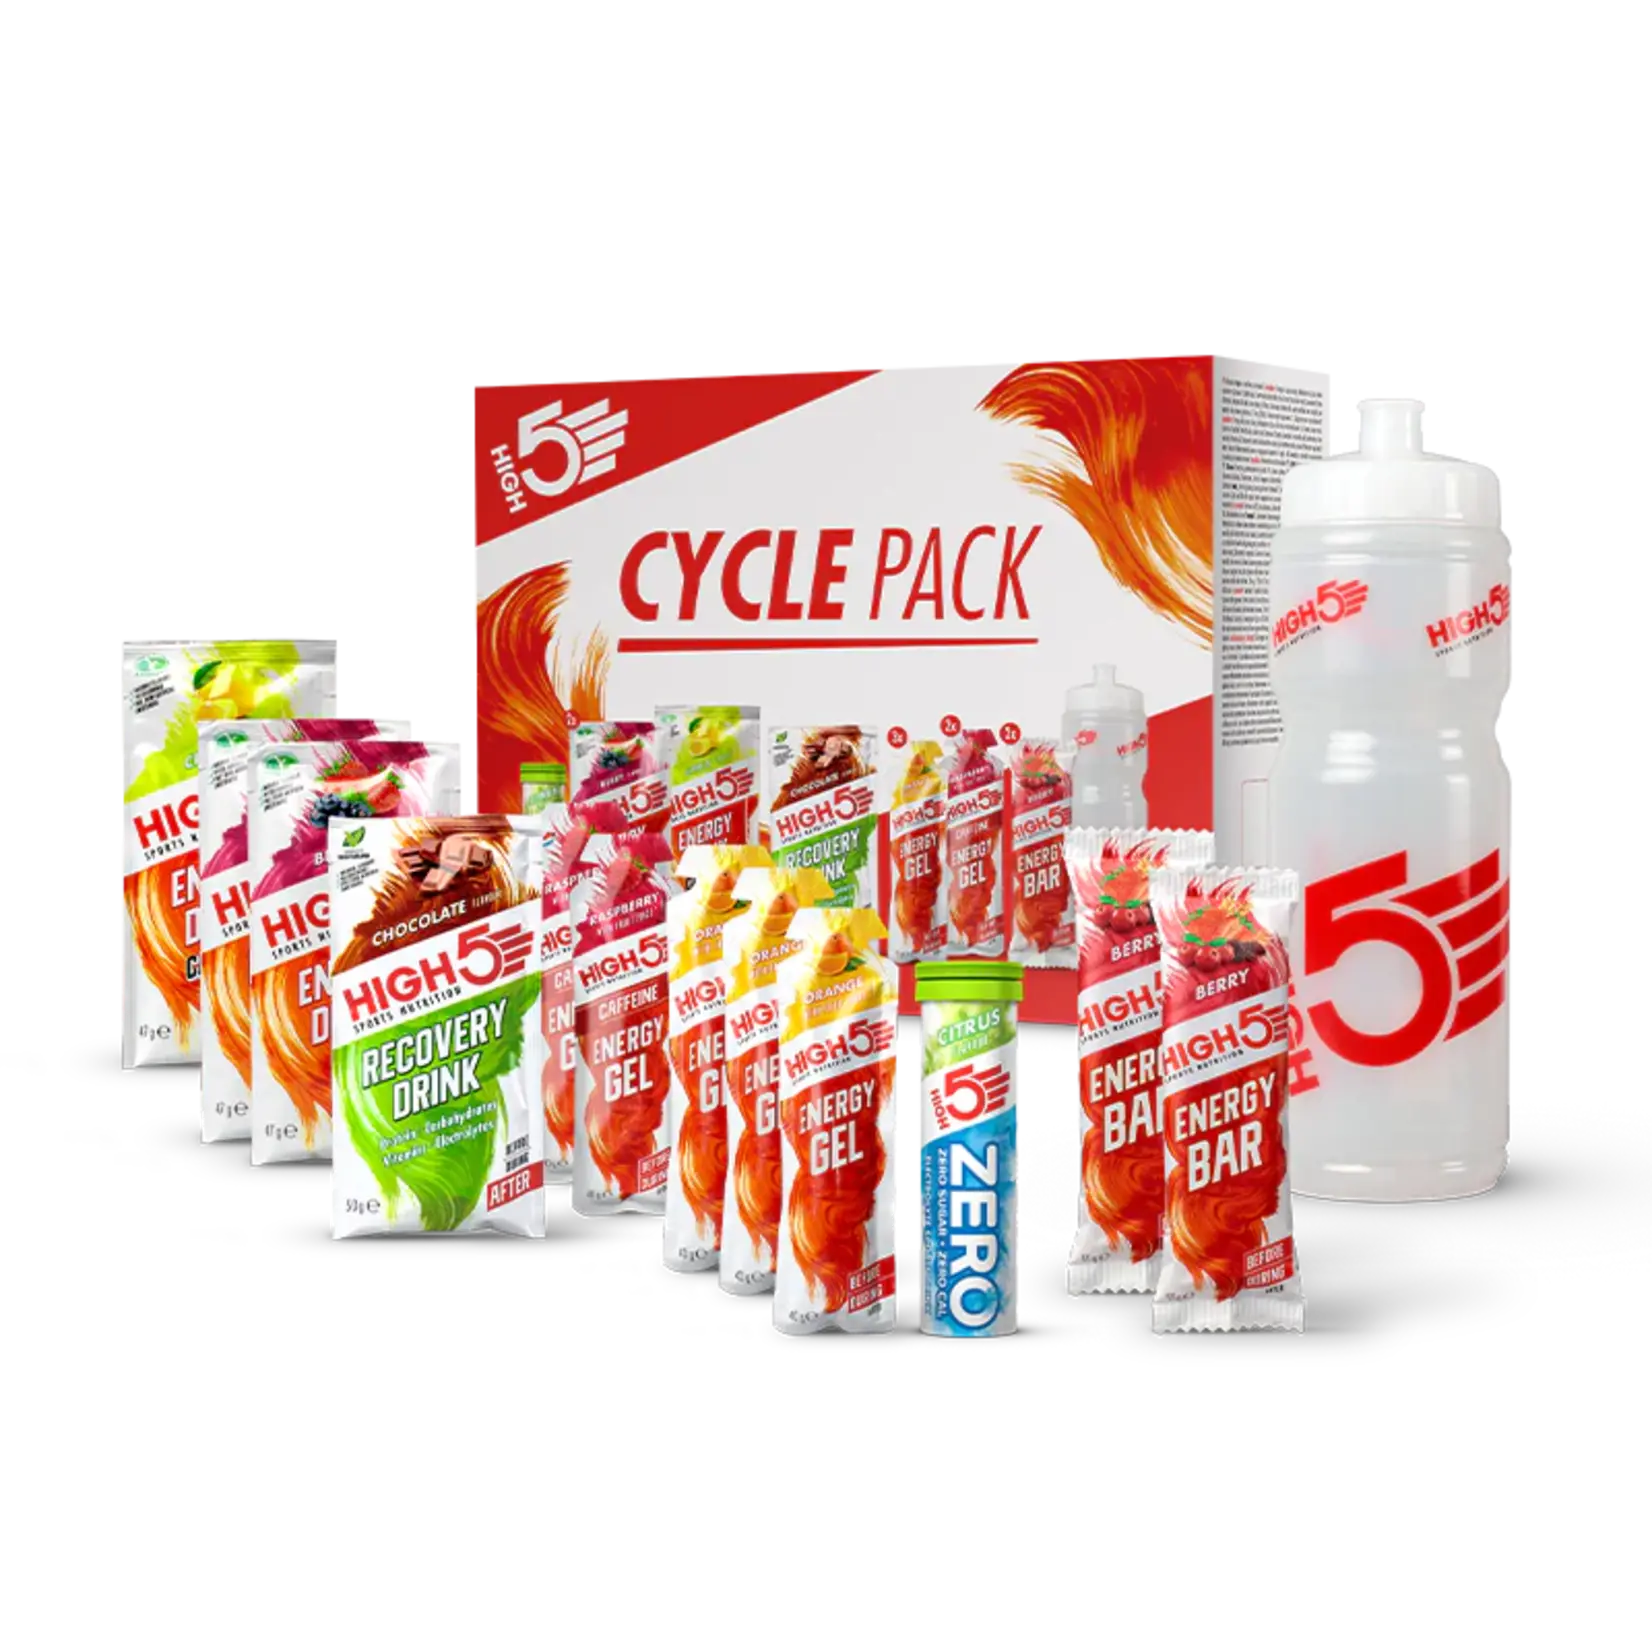 High 5 High5 Cycle Pack Tester